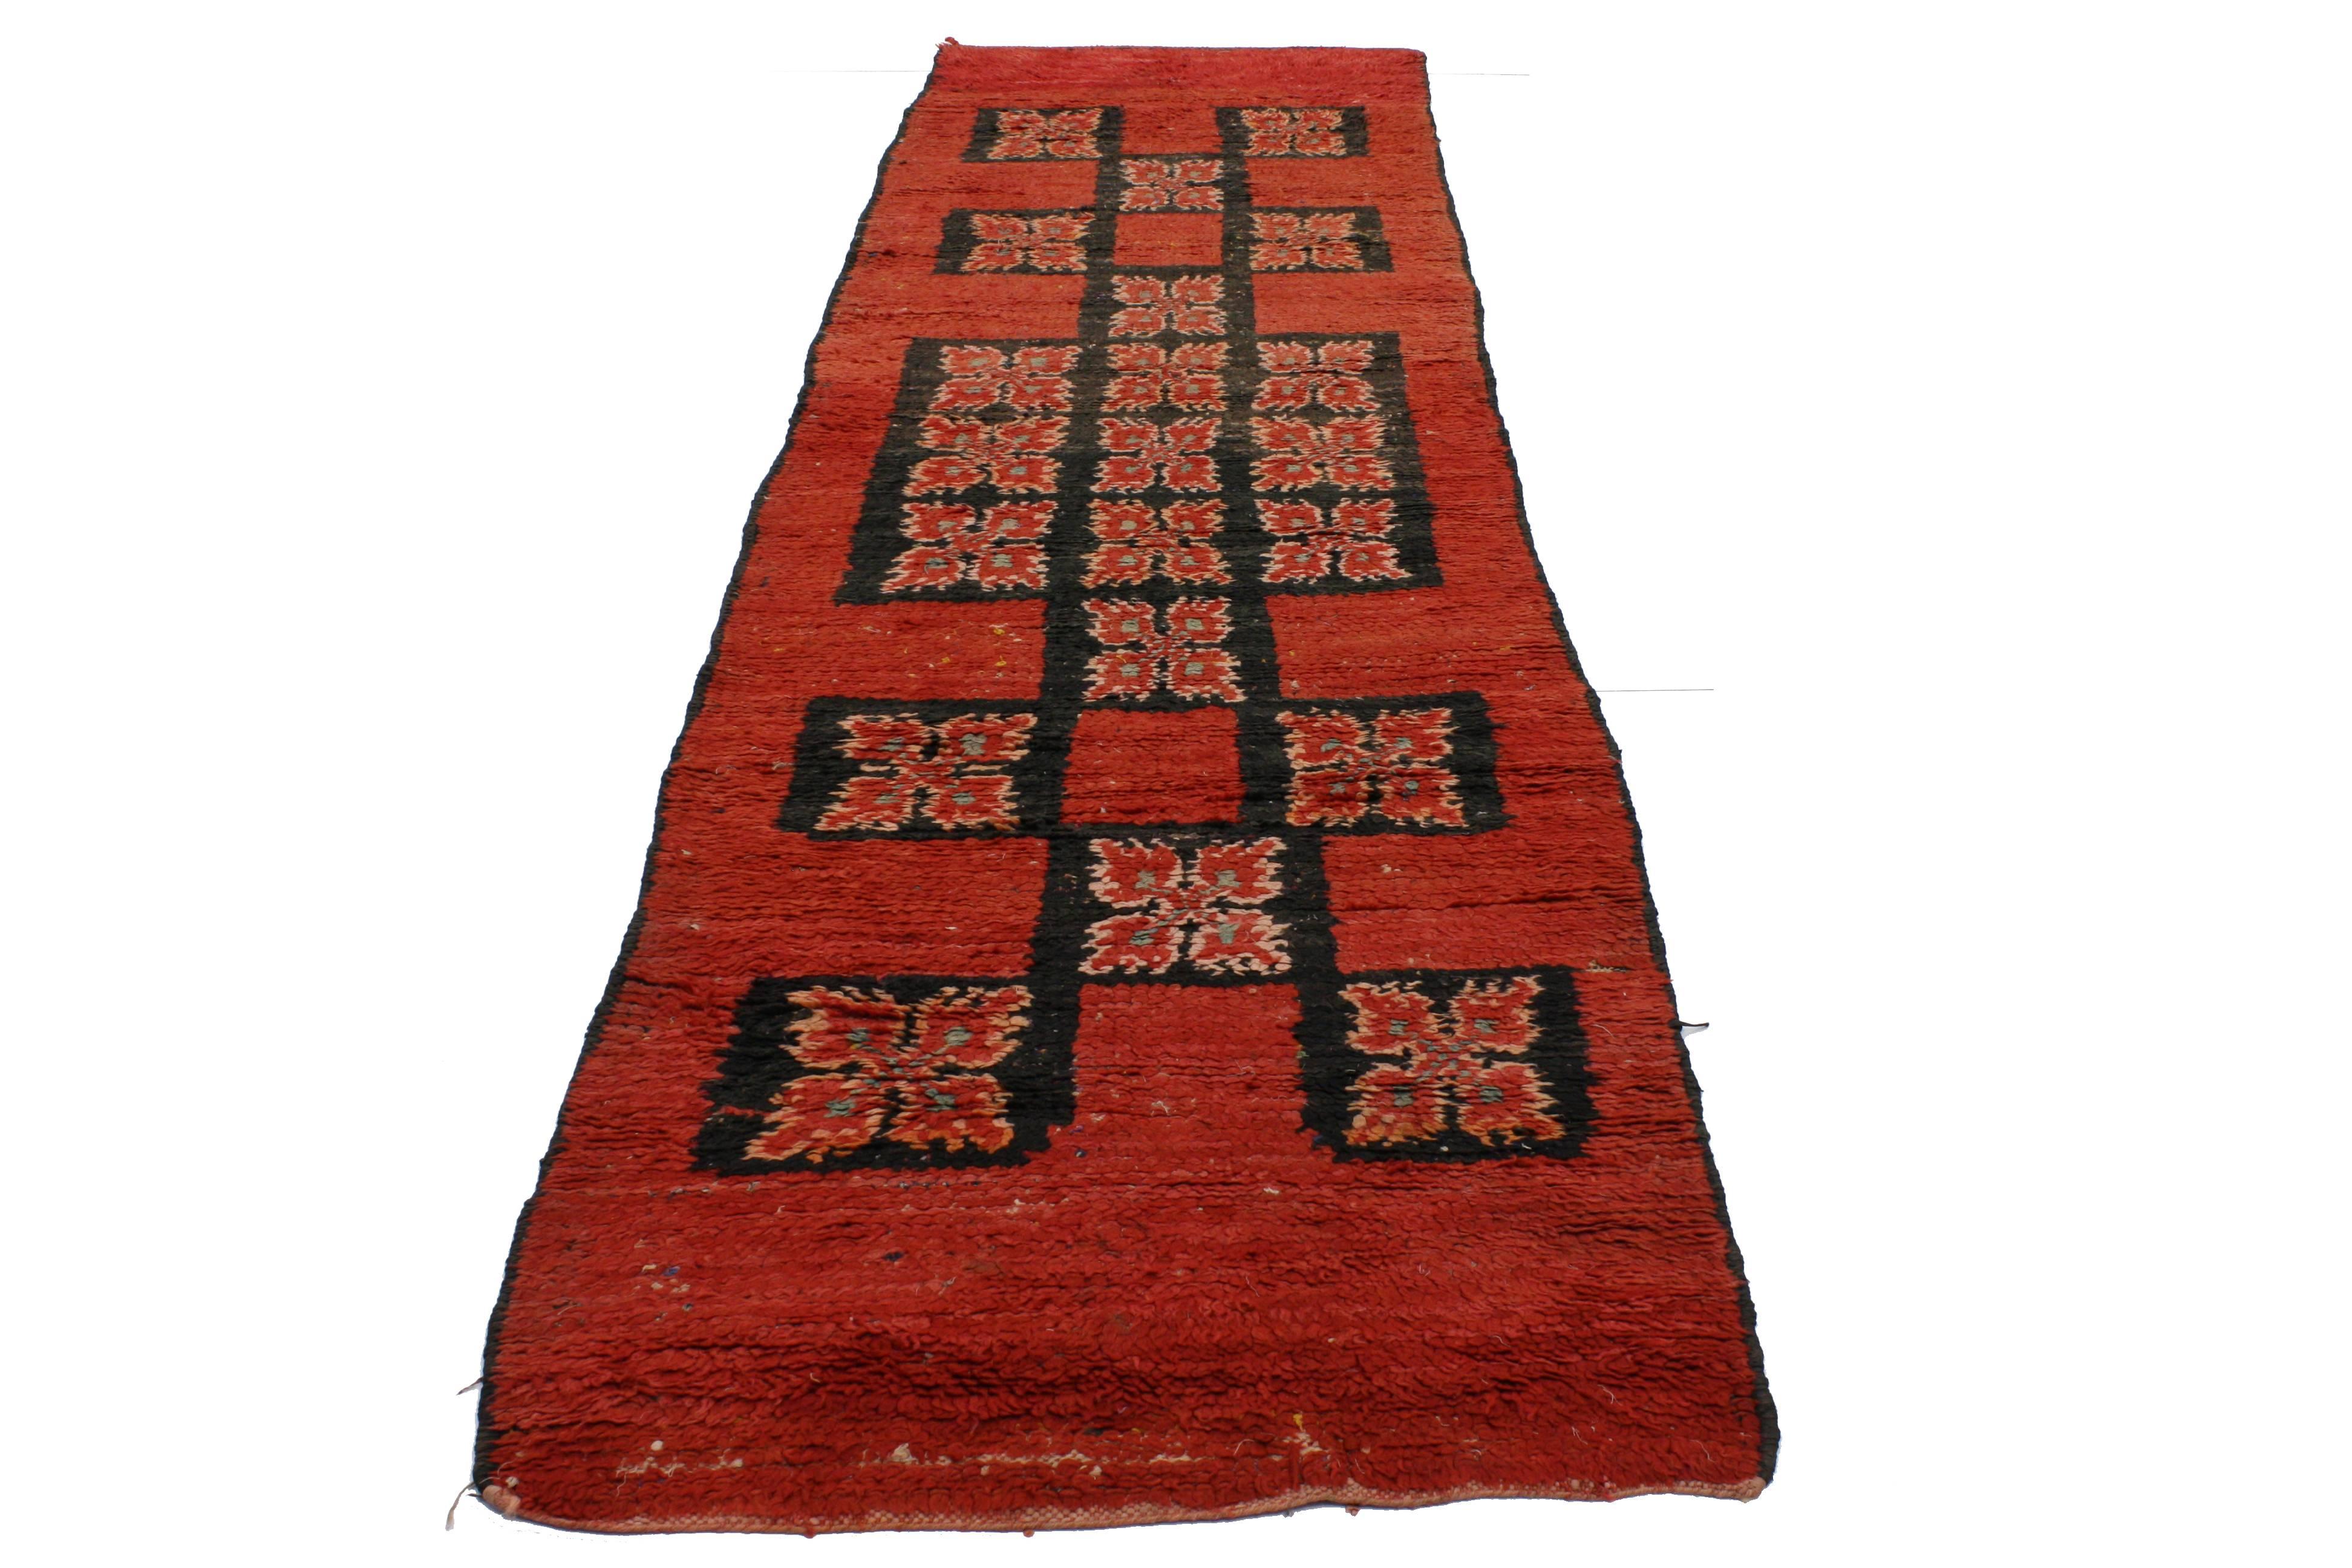 20253 Vintage Berber Moroccan Runner with Mid-Century Modern Style. This hand-knotted wool vintage Berber Moroccan runner features an open red abrashed field composed of black geometric square motifs stacked along the center. With its edgy elements